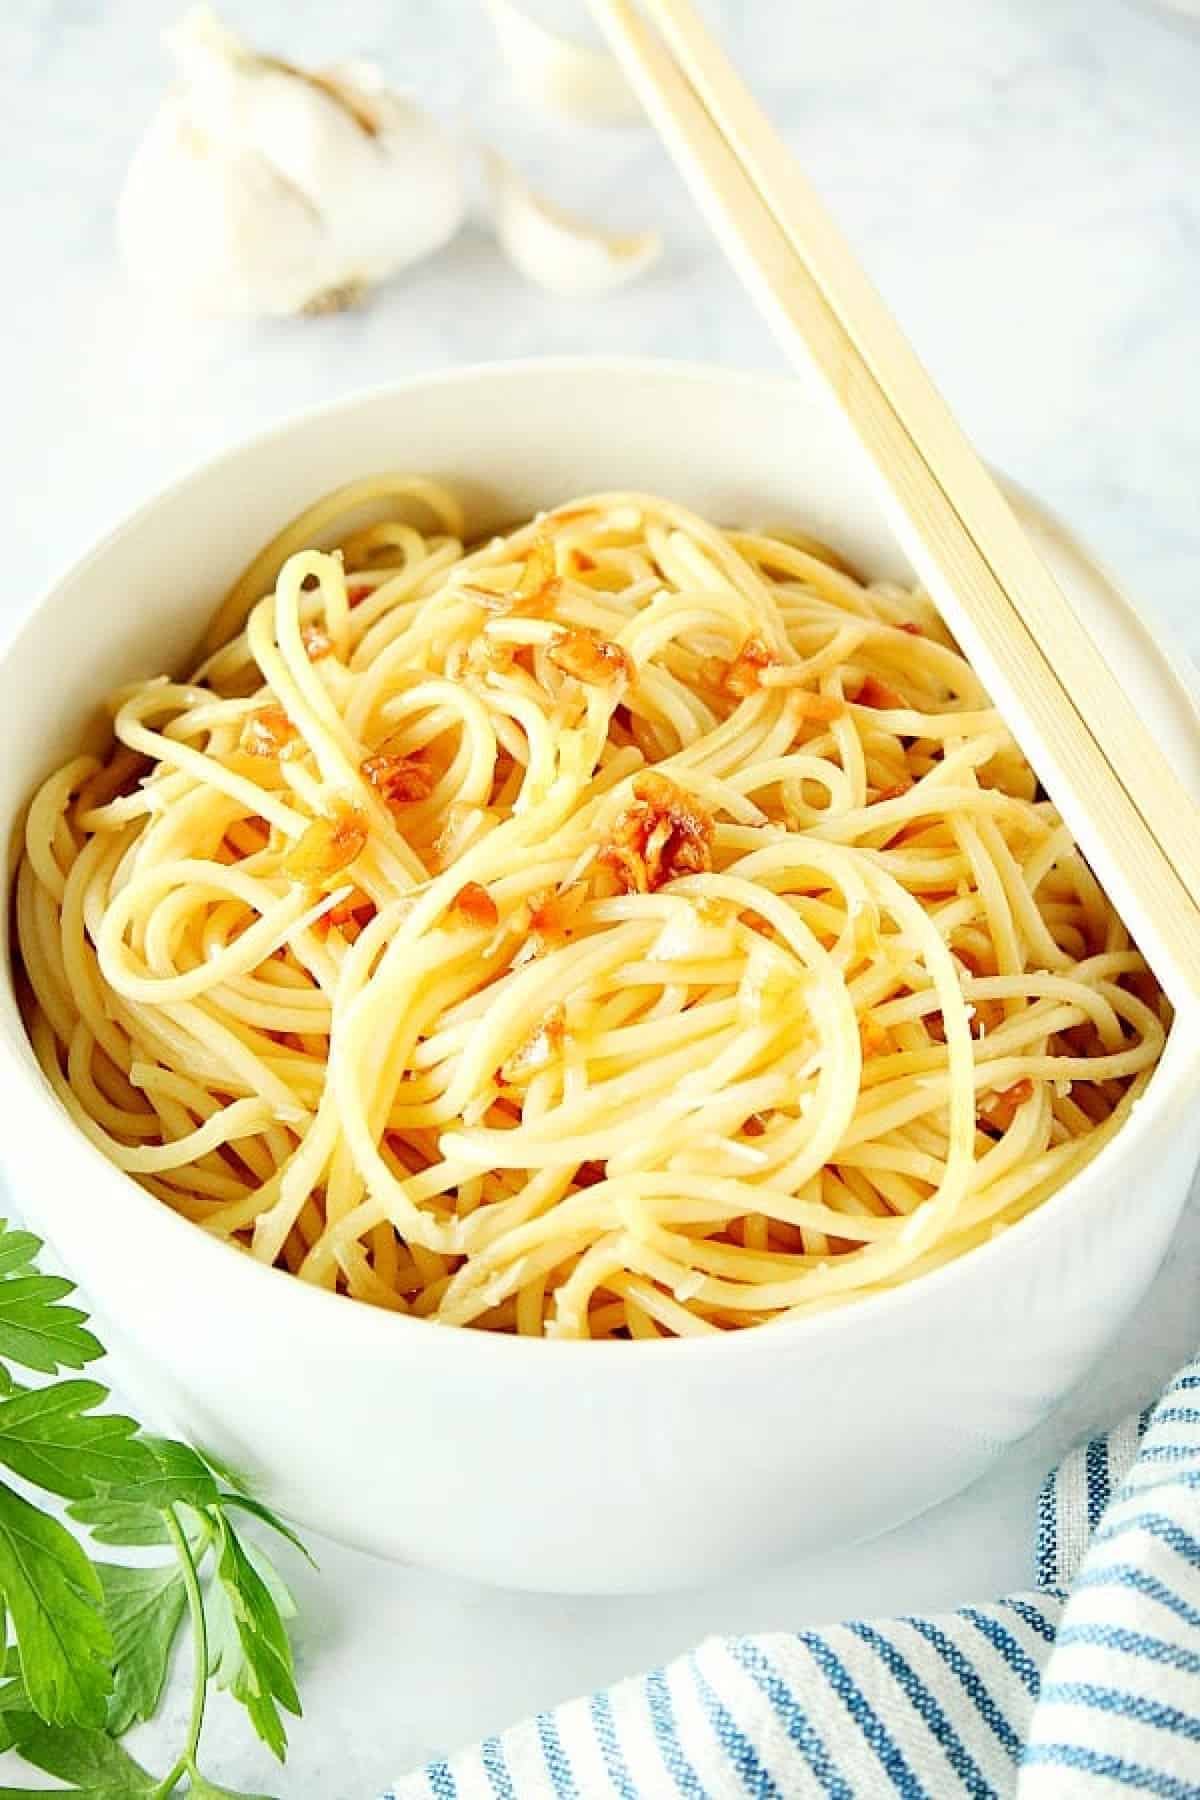 Noodles with garlic in a white bowl with chopsticks placed on the edge.